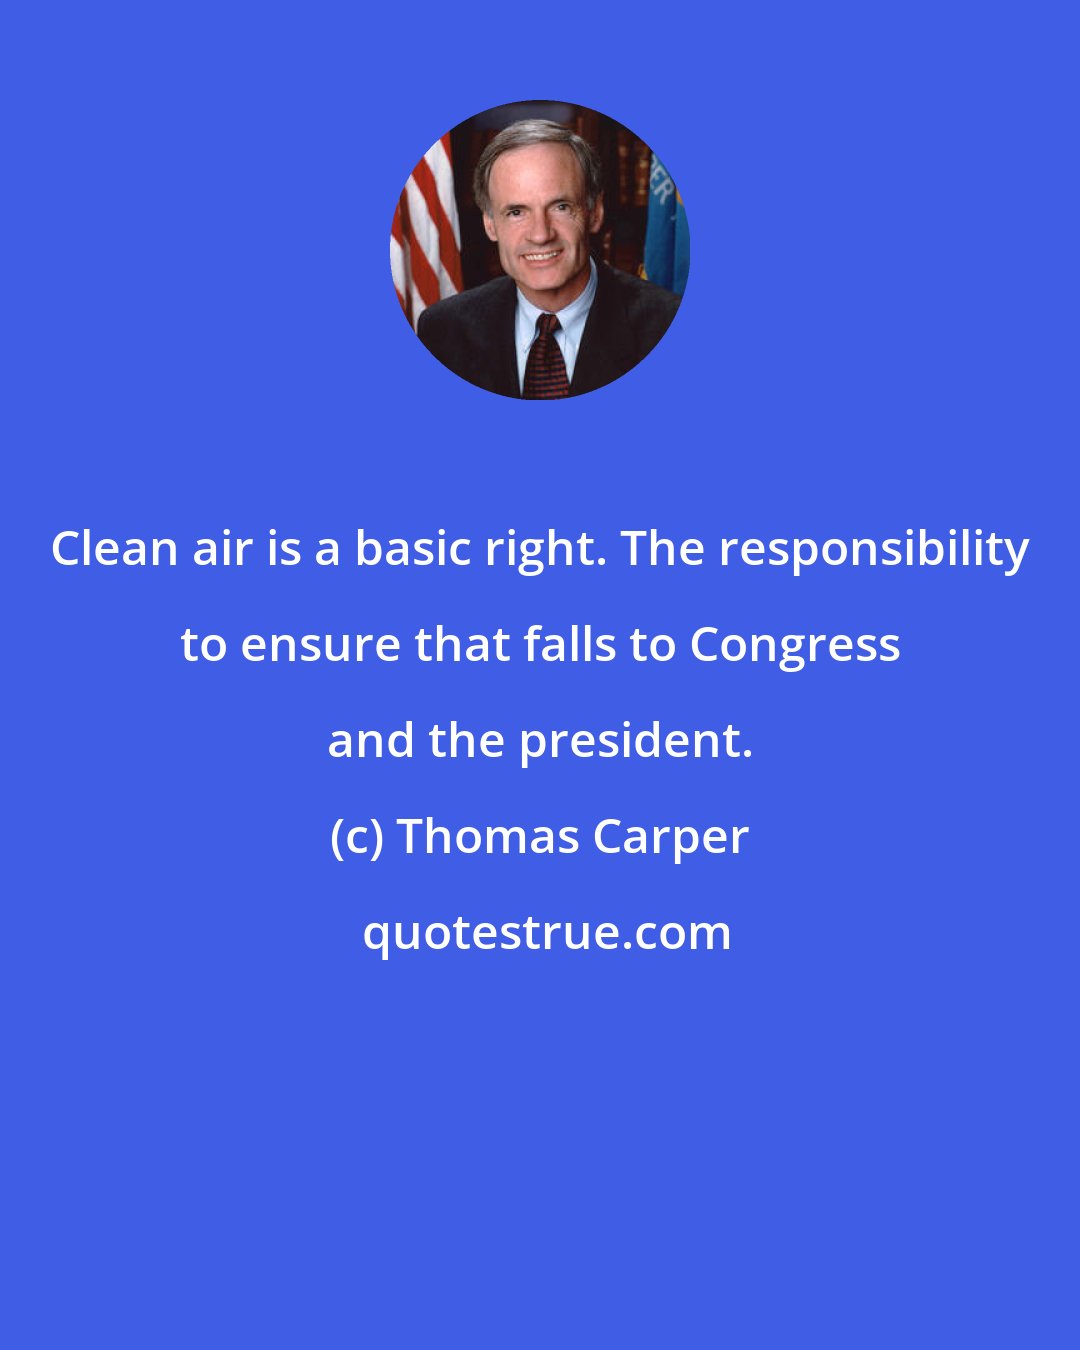 Thomas Carper: Clean air is a basic right. The responsibility to ensure that falls to Congress and the president.